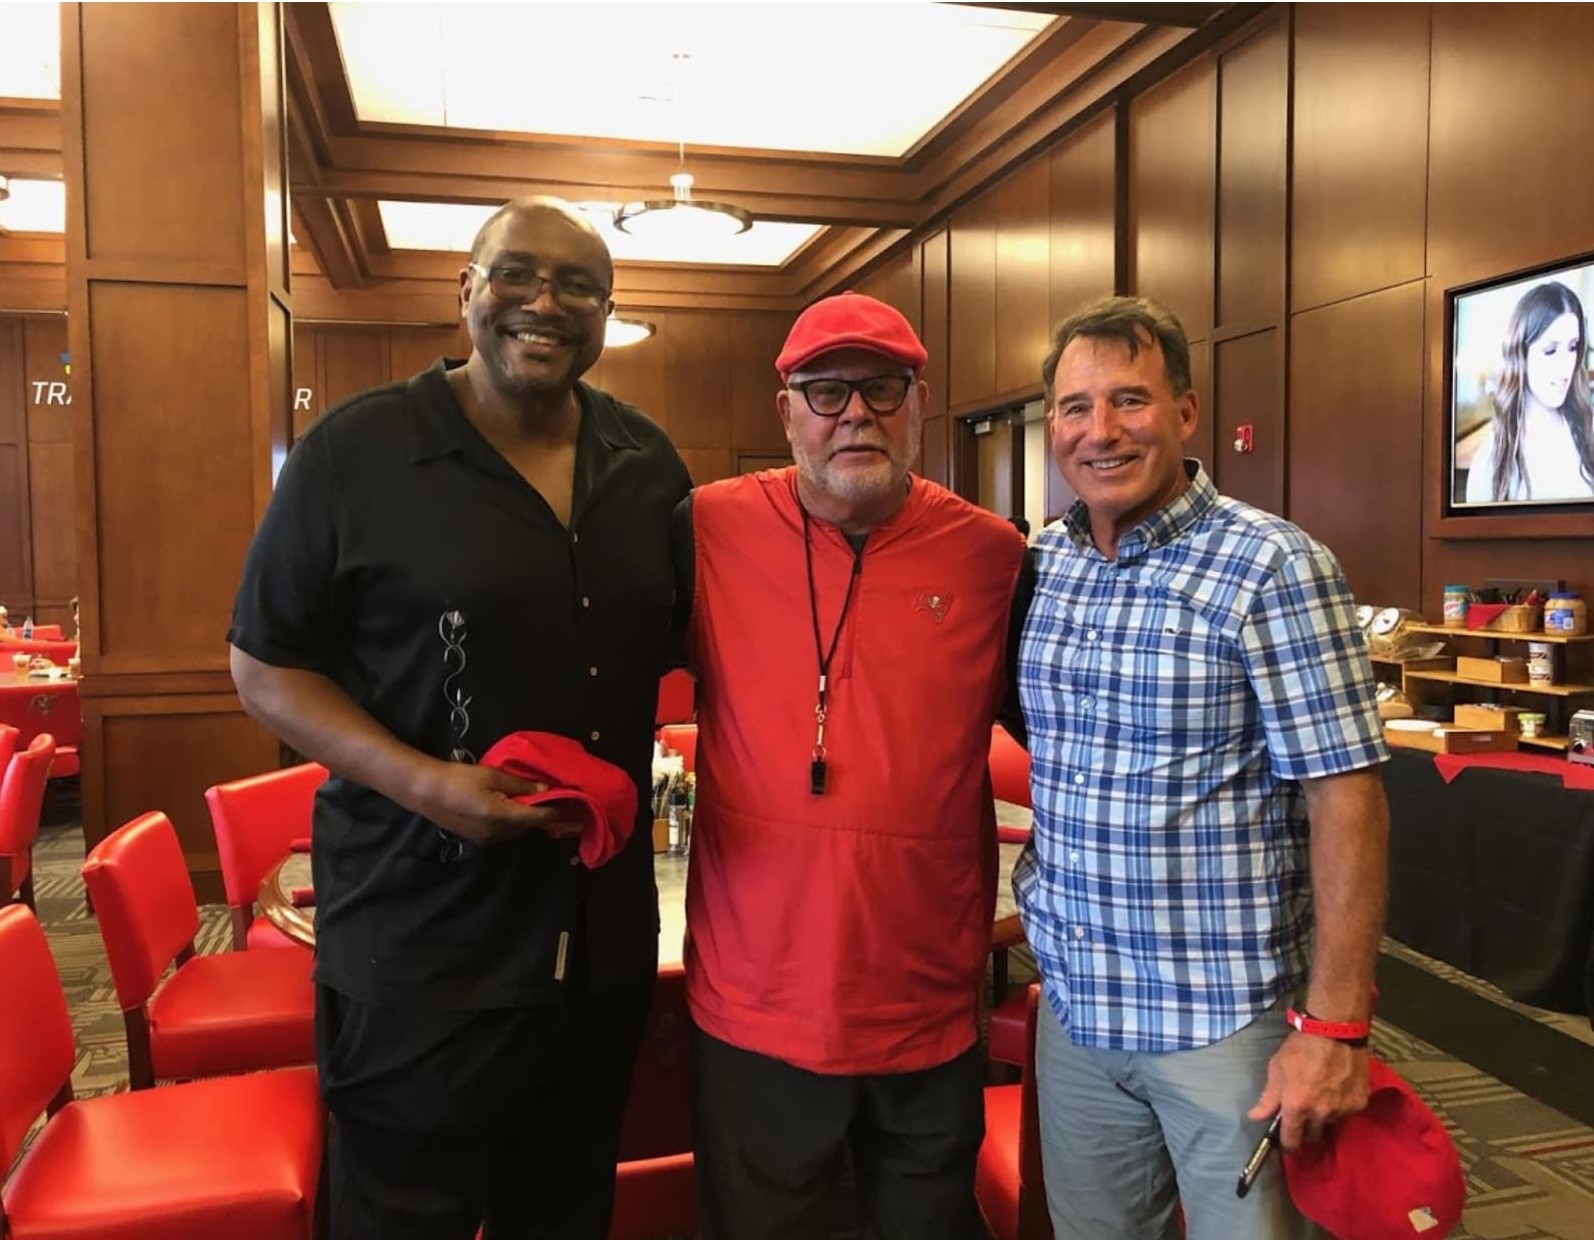 Group photo of Tyrone Keys, Bruce Arians and Mike McEnany